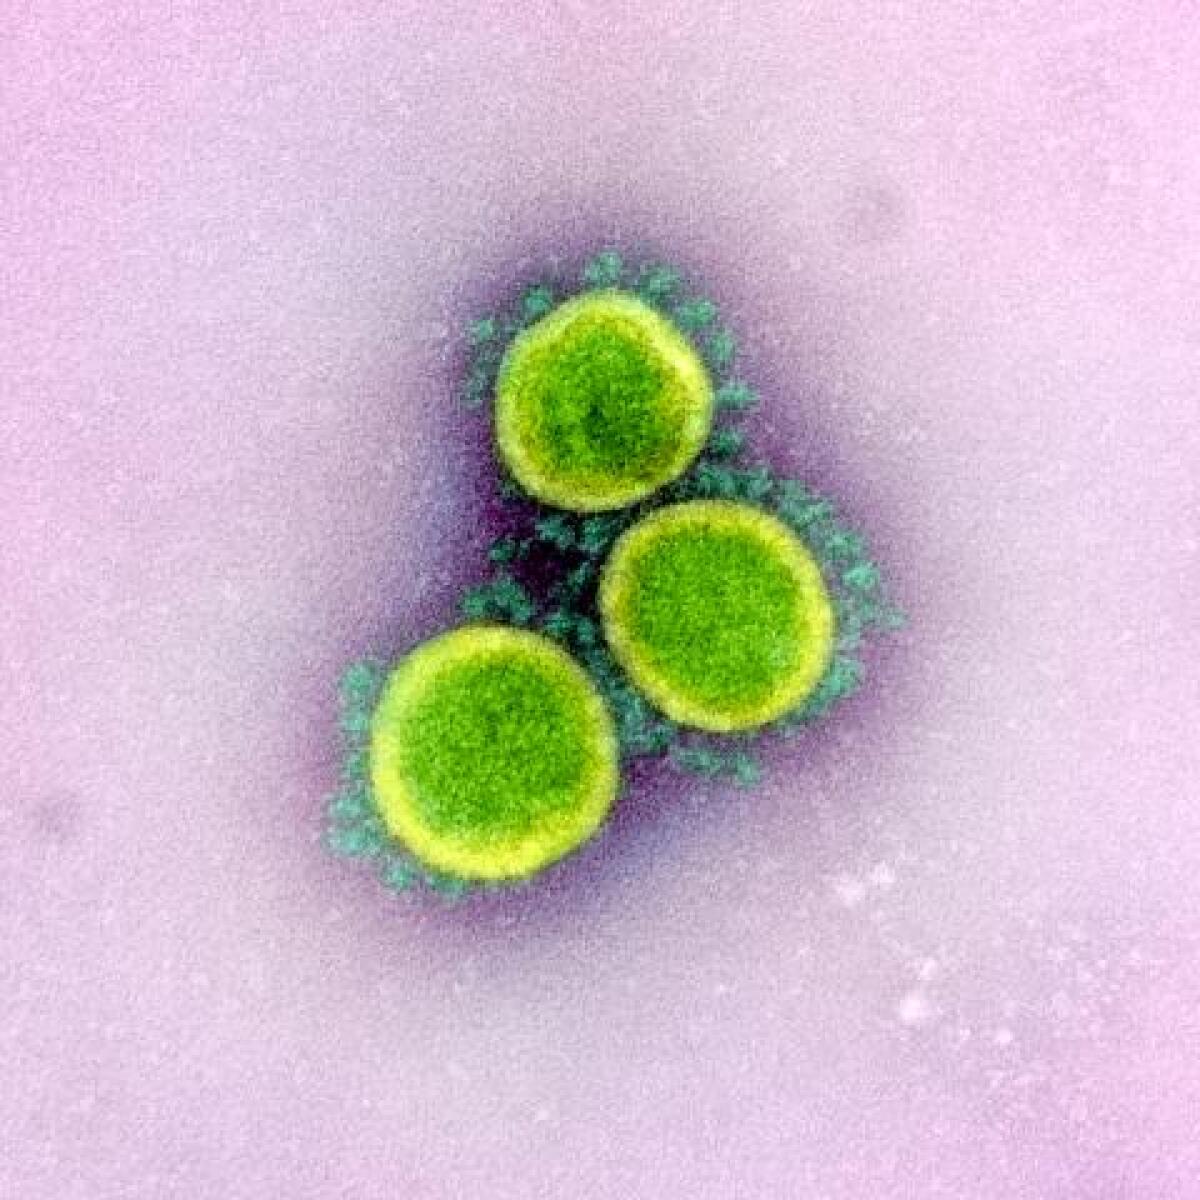 A color-enhanced image of SARS-CoV-2 coronavirus isolated from a patient.